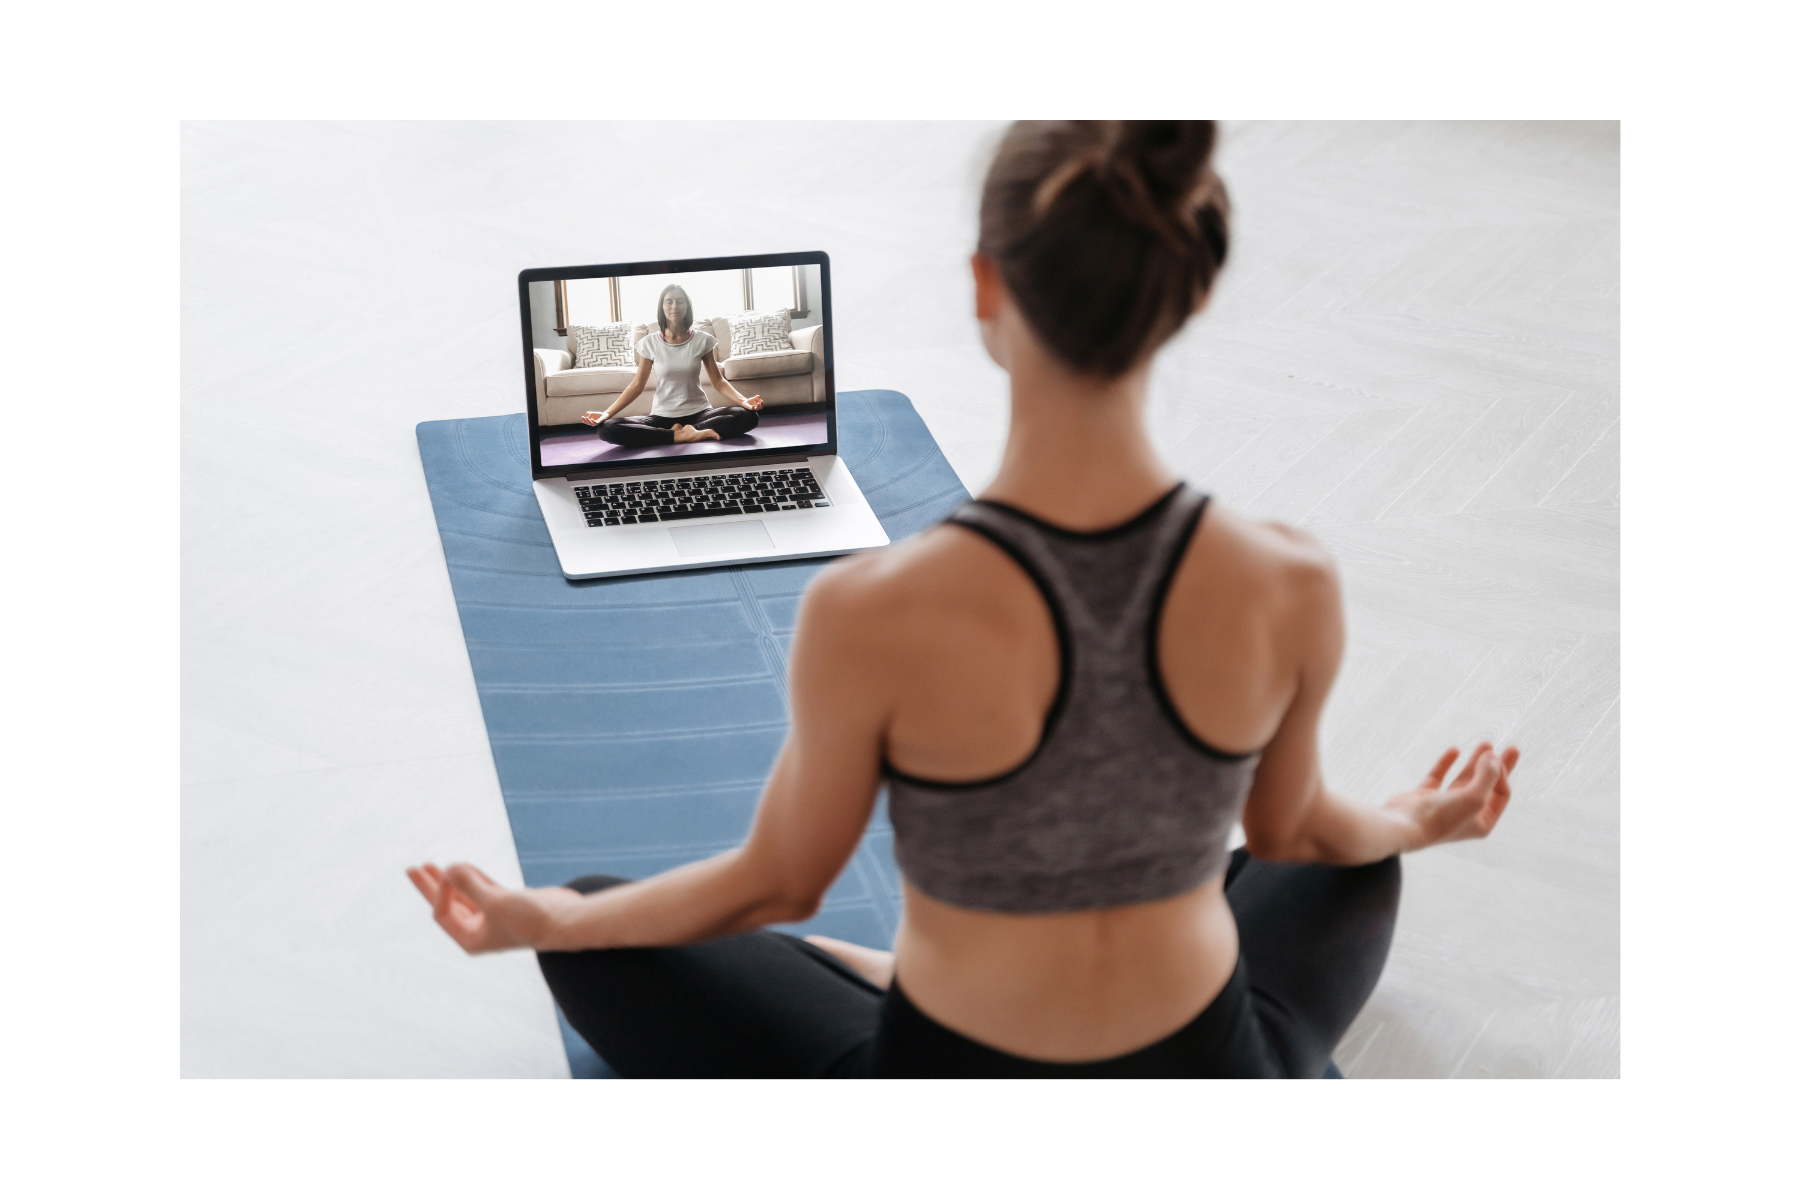 Why choose us for your virtual home yoga studio service